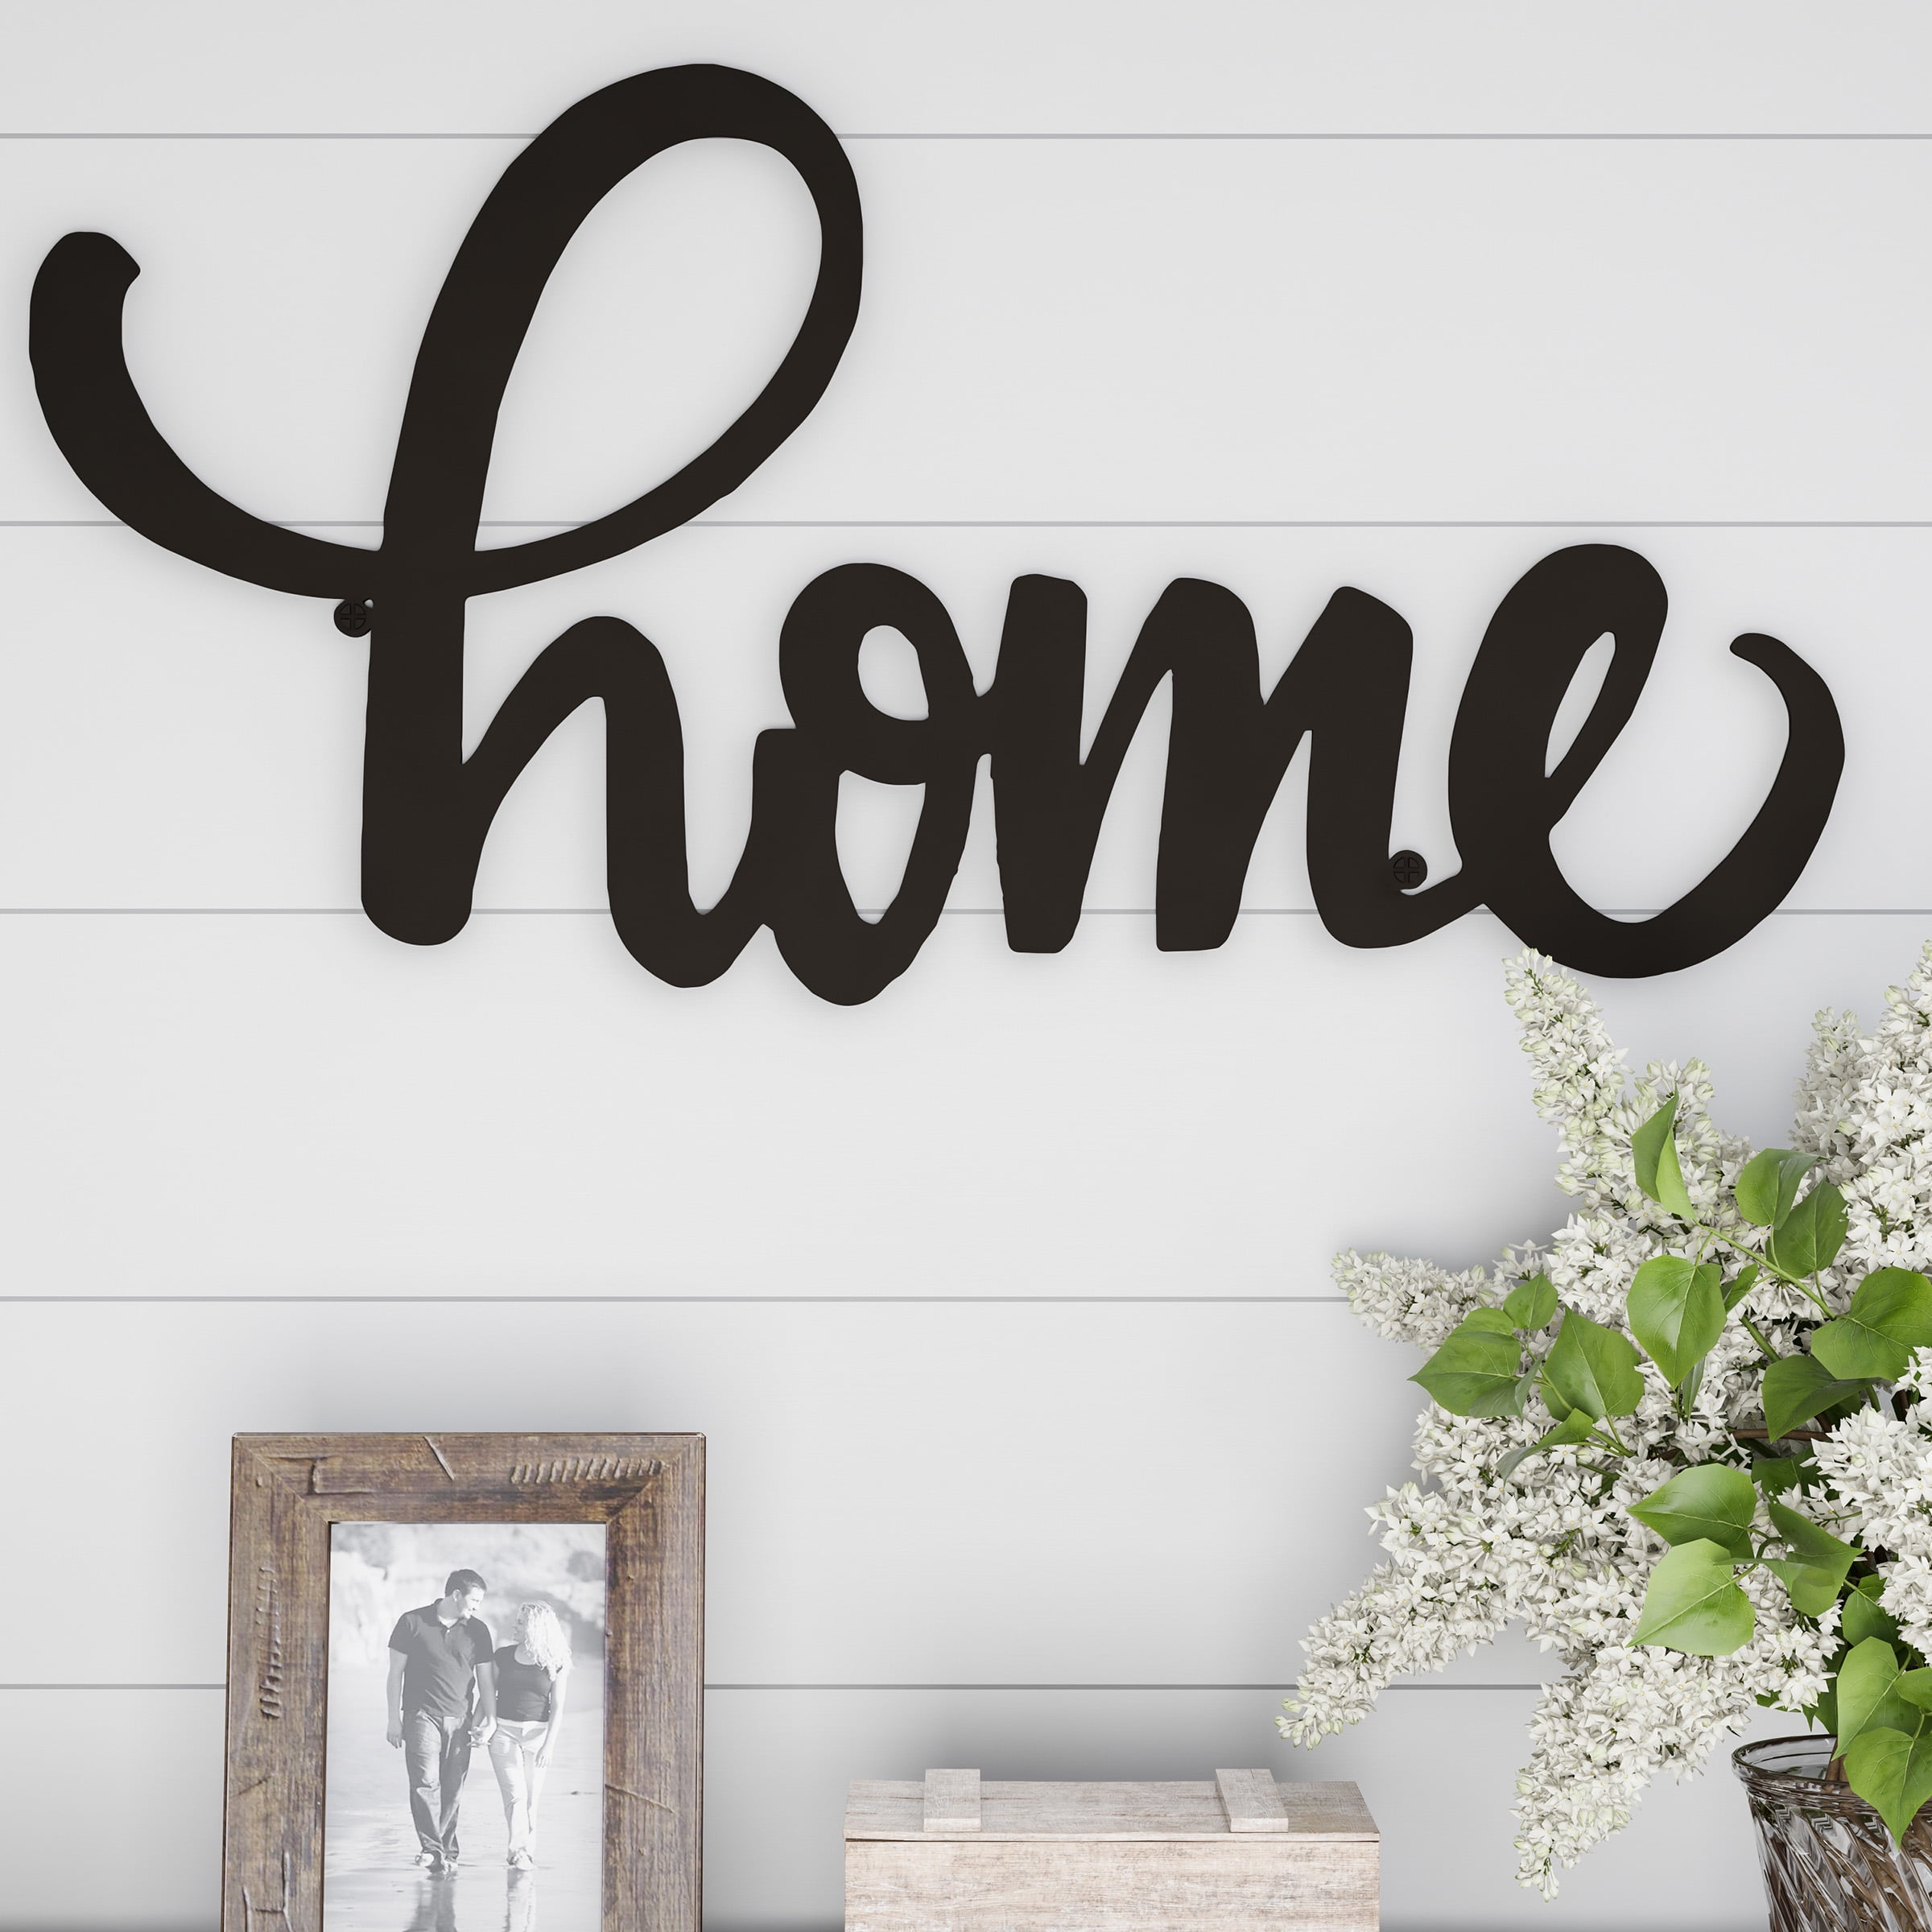 Welcome Script Metal Word Art Sign Entryway Farmhouse Wall Hanging Plaque Home Decor